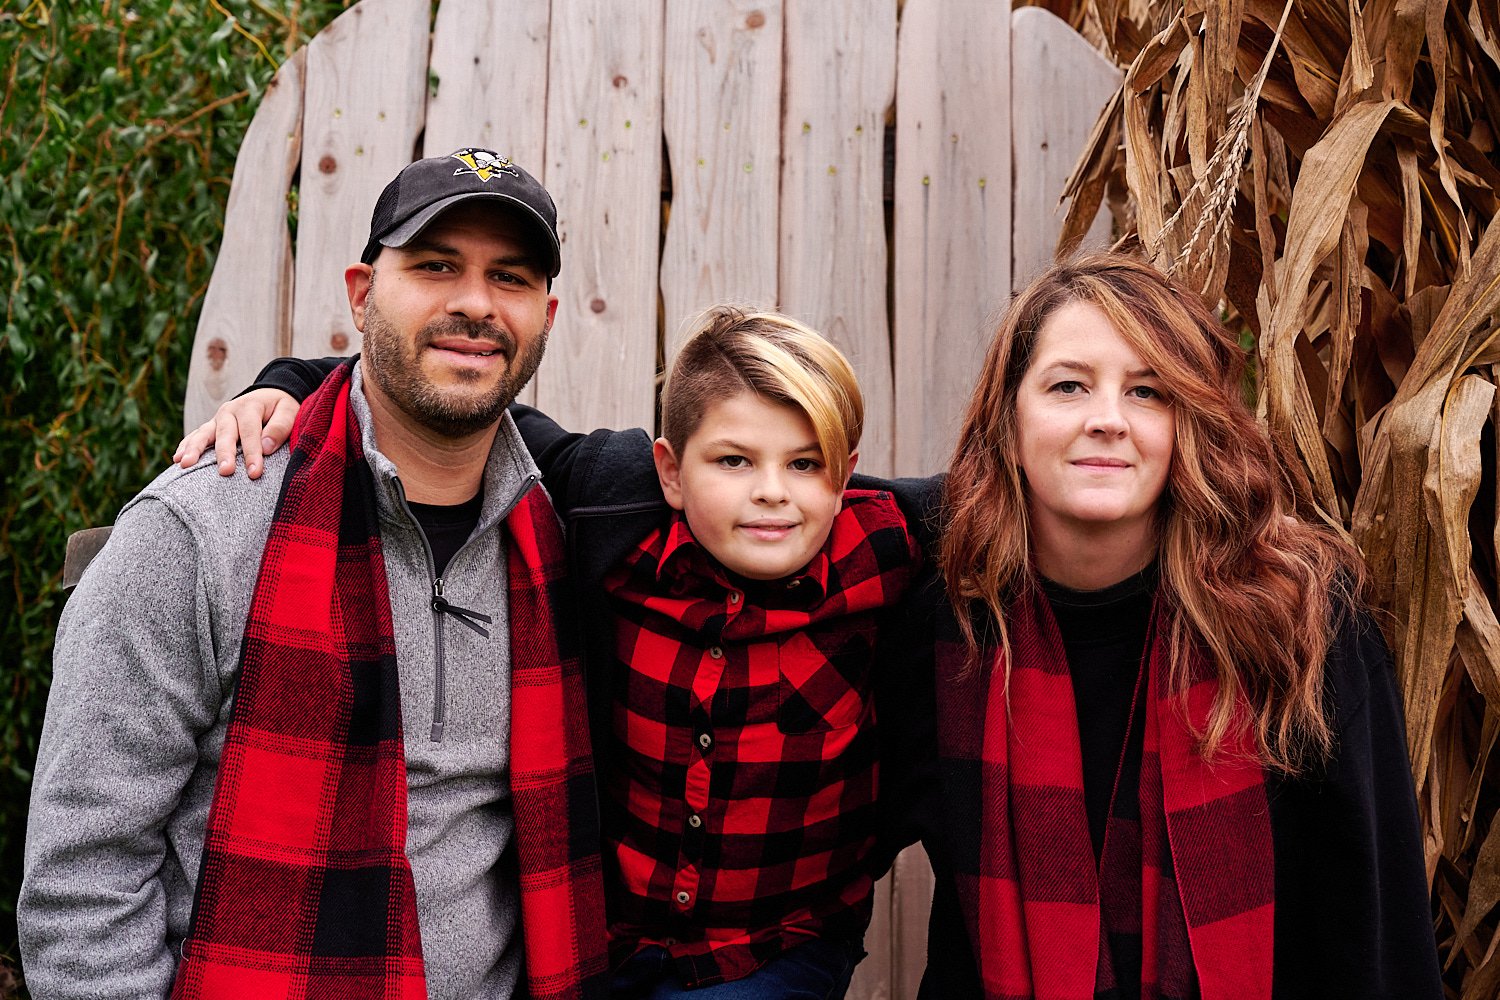  Andrea D’Alessandro is posing with her extended family in front of Phipps Conservatory and Botanical Gardens of Pittsburgh, PA. The large group is wearing red checked flannel shirts and blue jeans. 